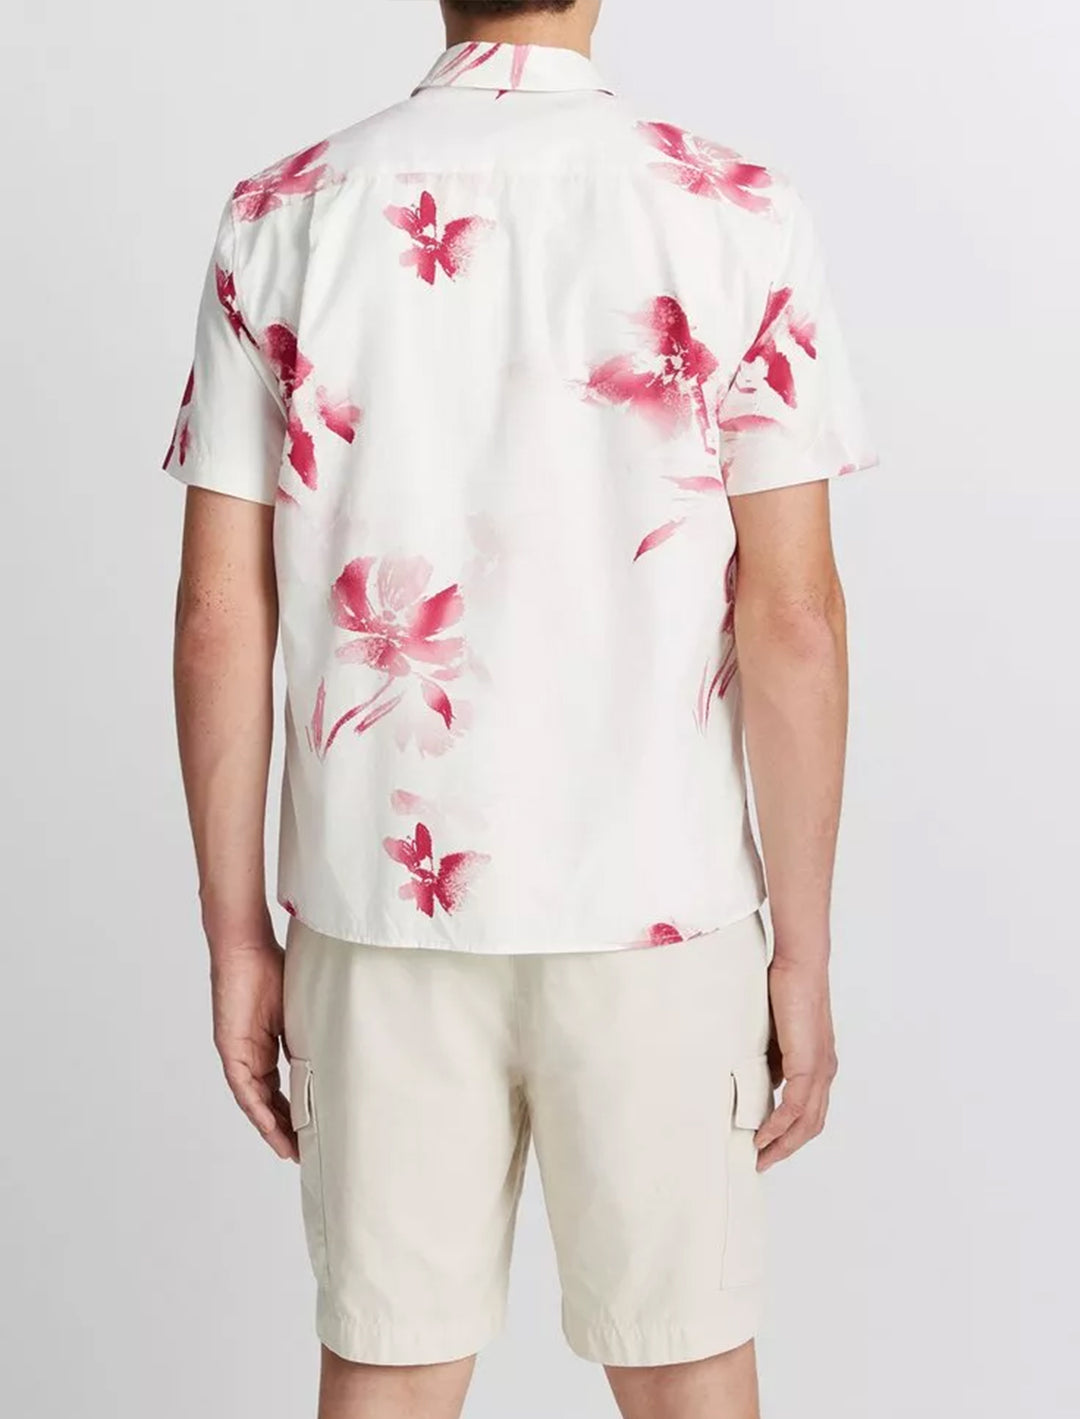 mens faded floral s/s shirt in dark pink blaze (3)